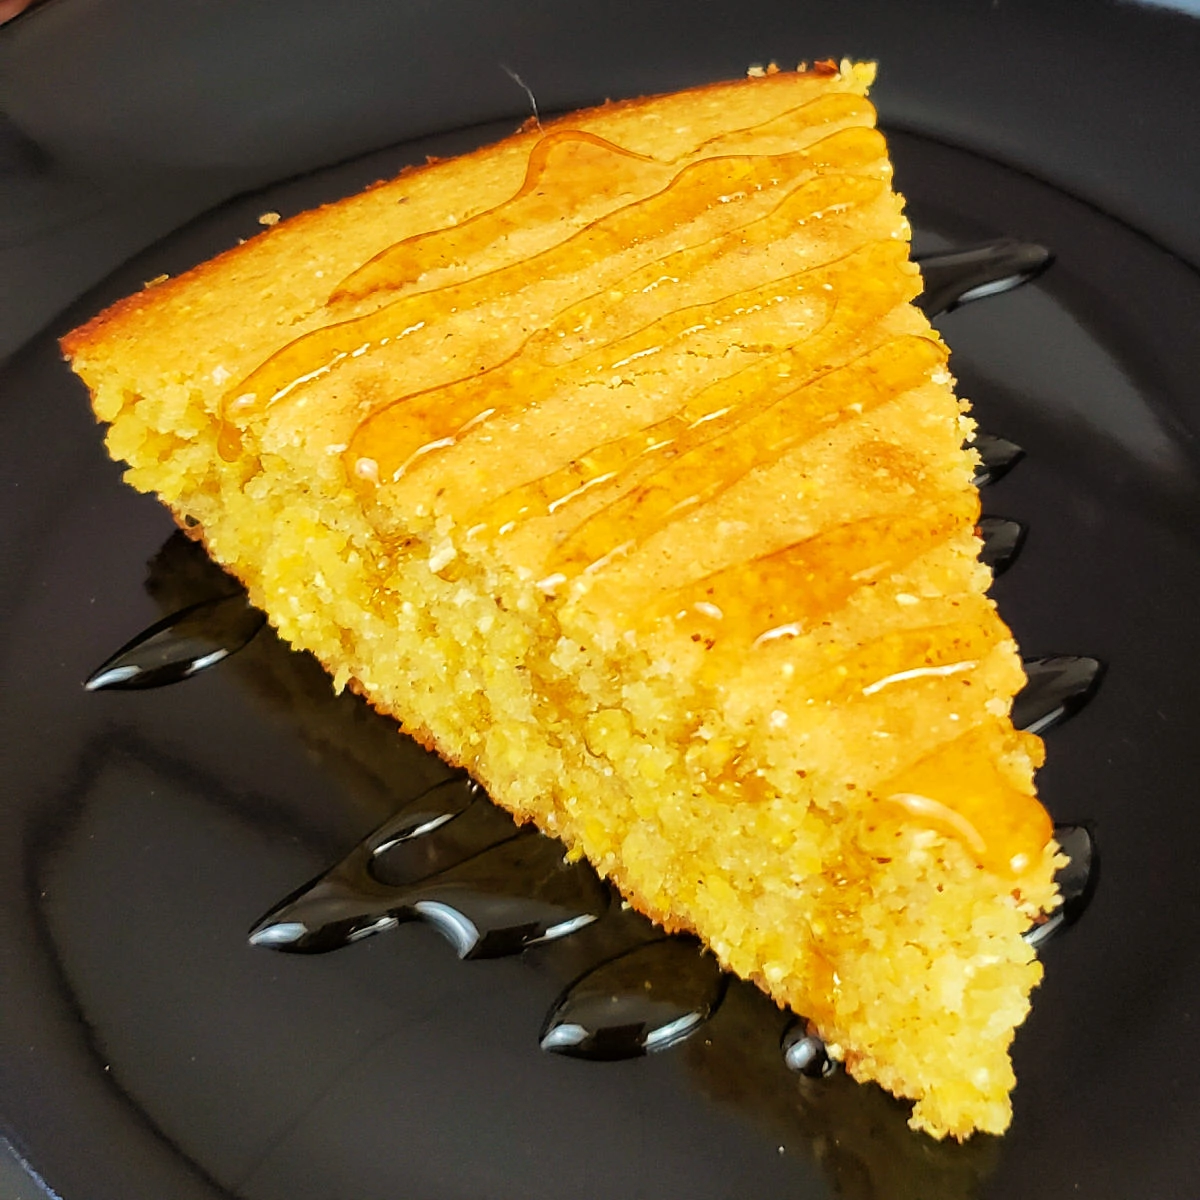 Slice of gluten free cornbread drizzled with honey on a black dessert plate.